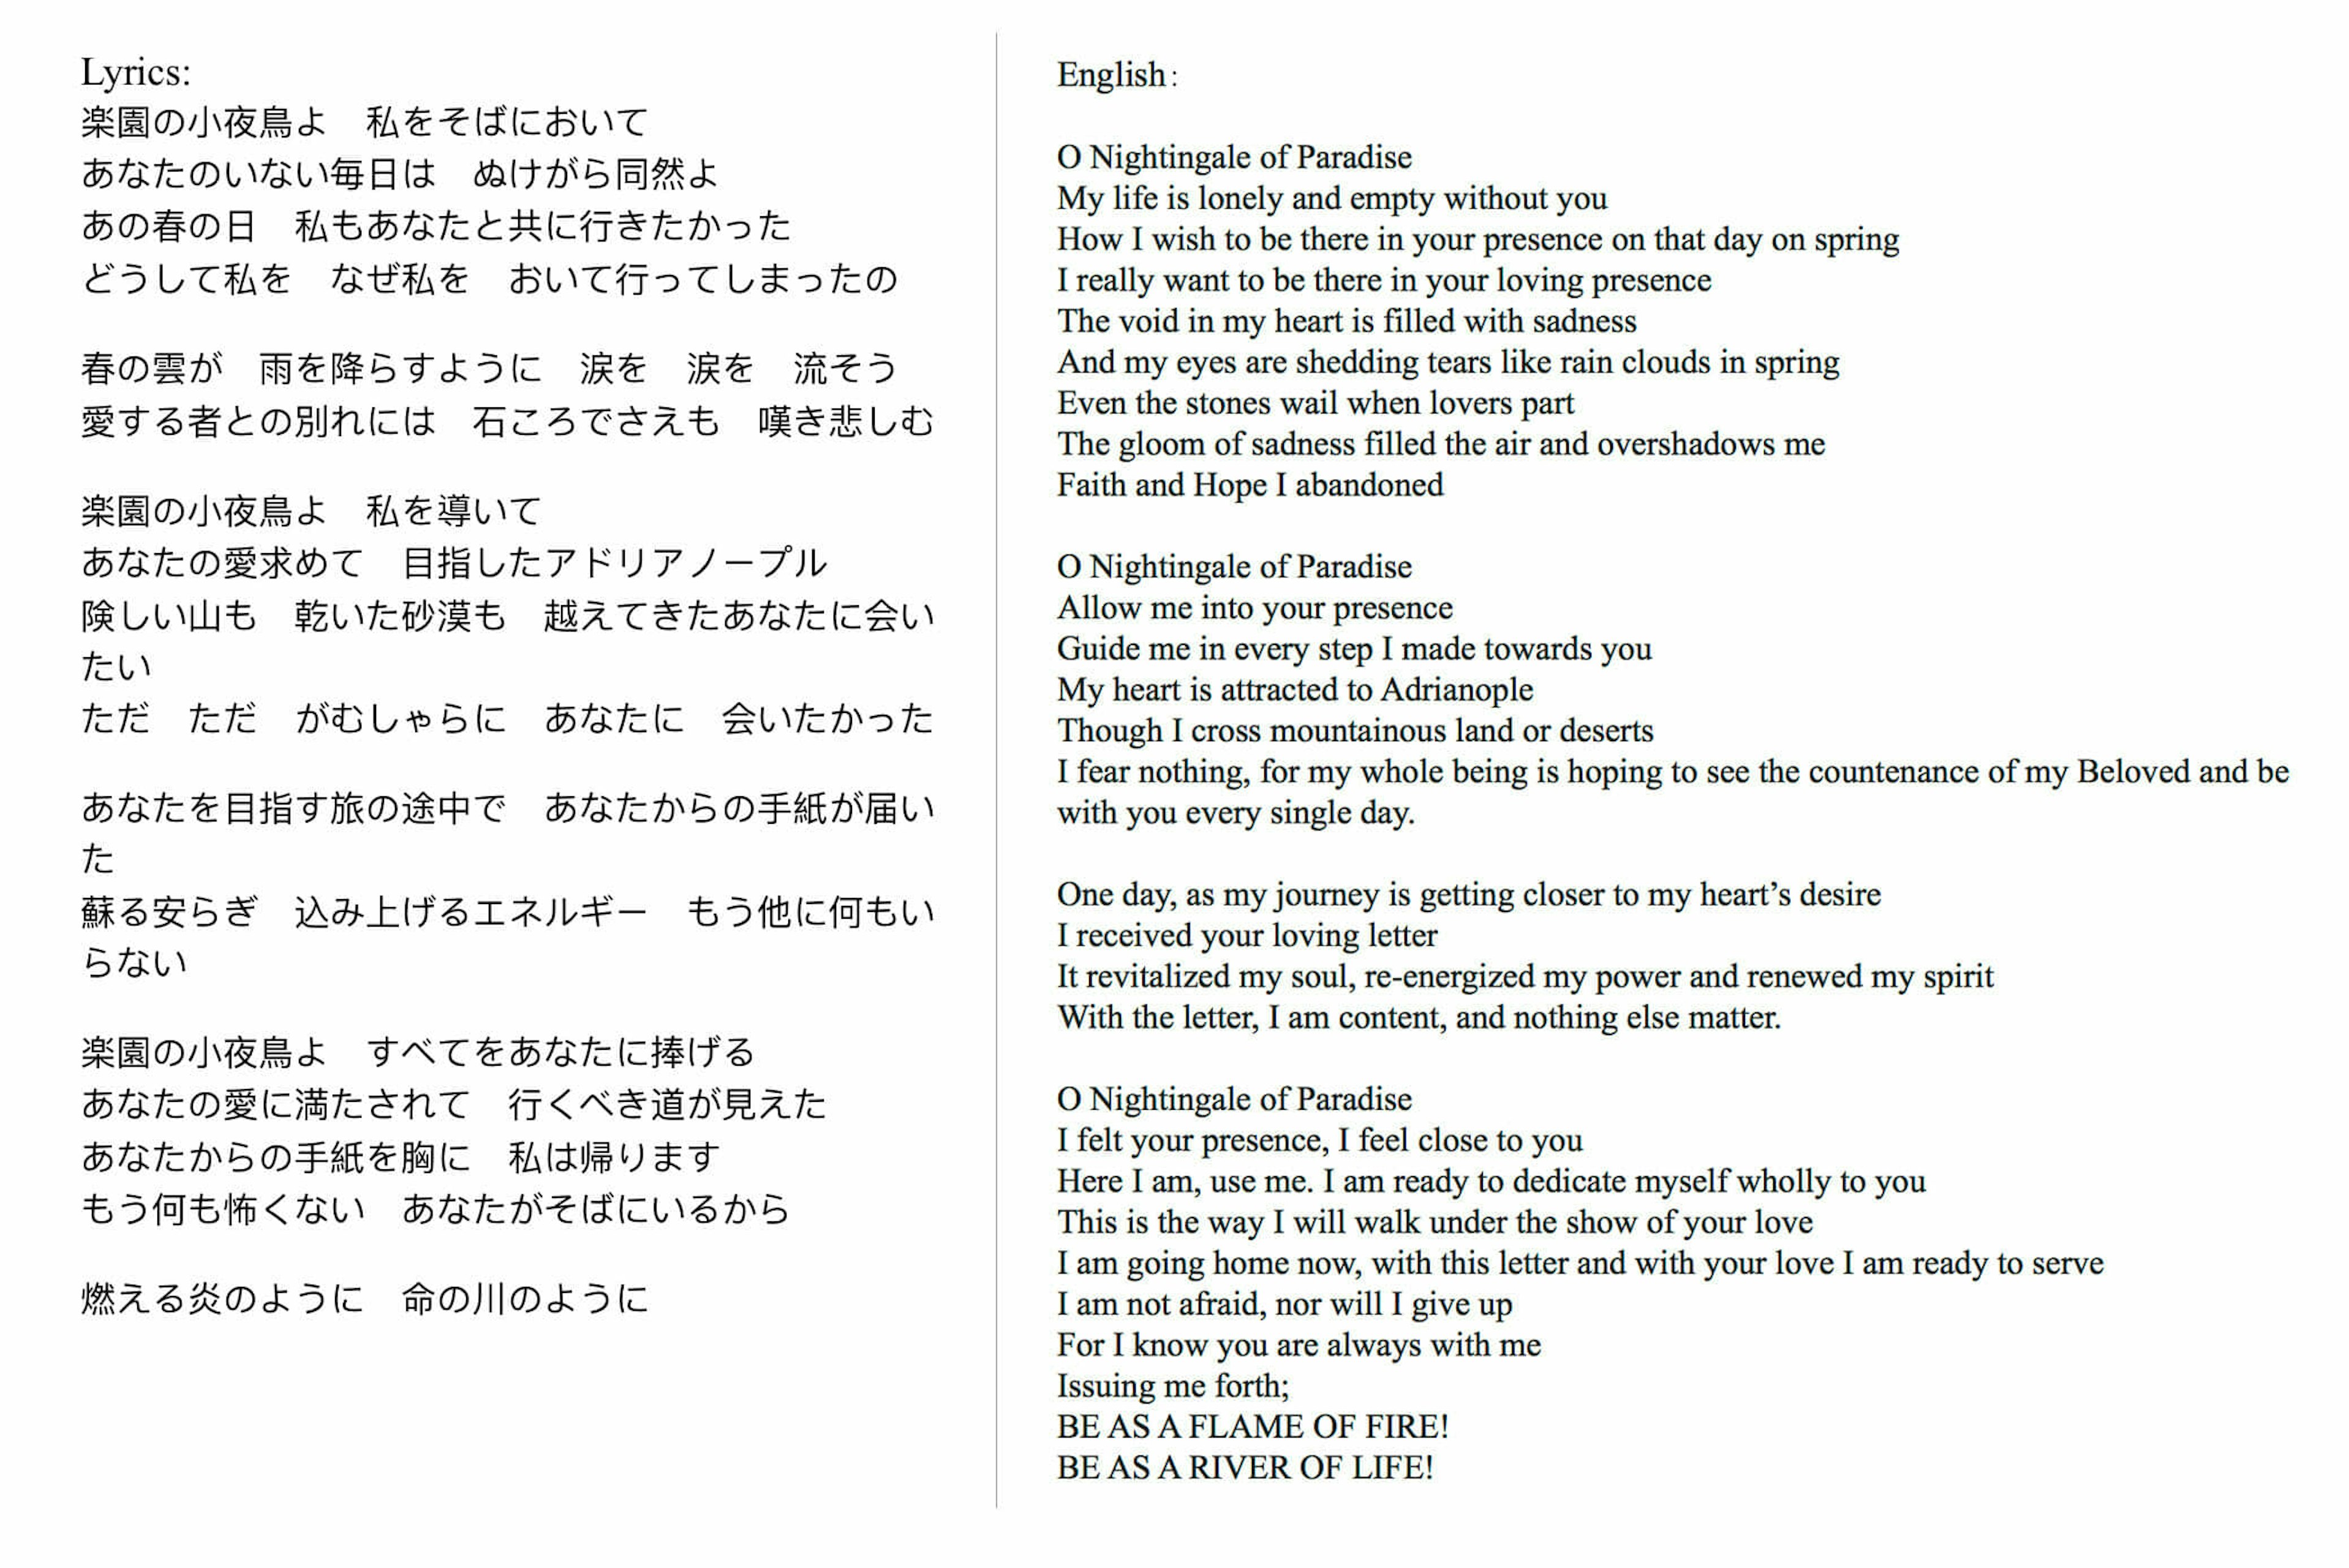 A Song From Japan Entitled アドリアノープルからの手紙 Letter From Adrianople